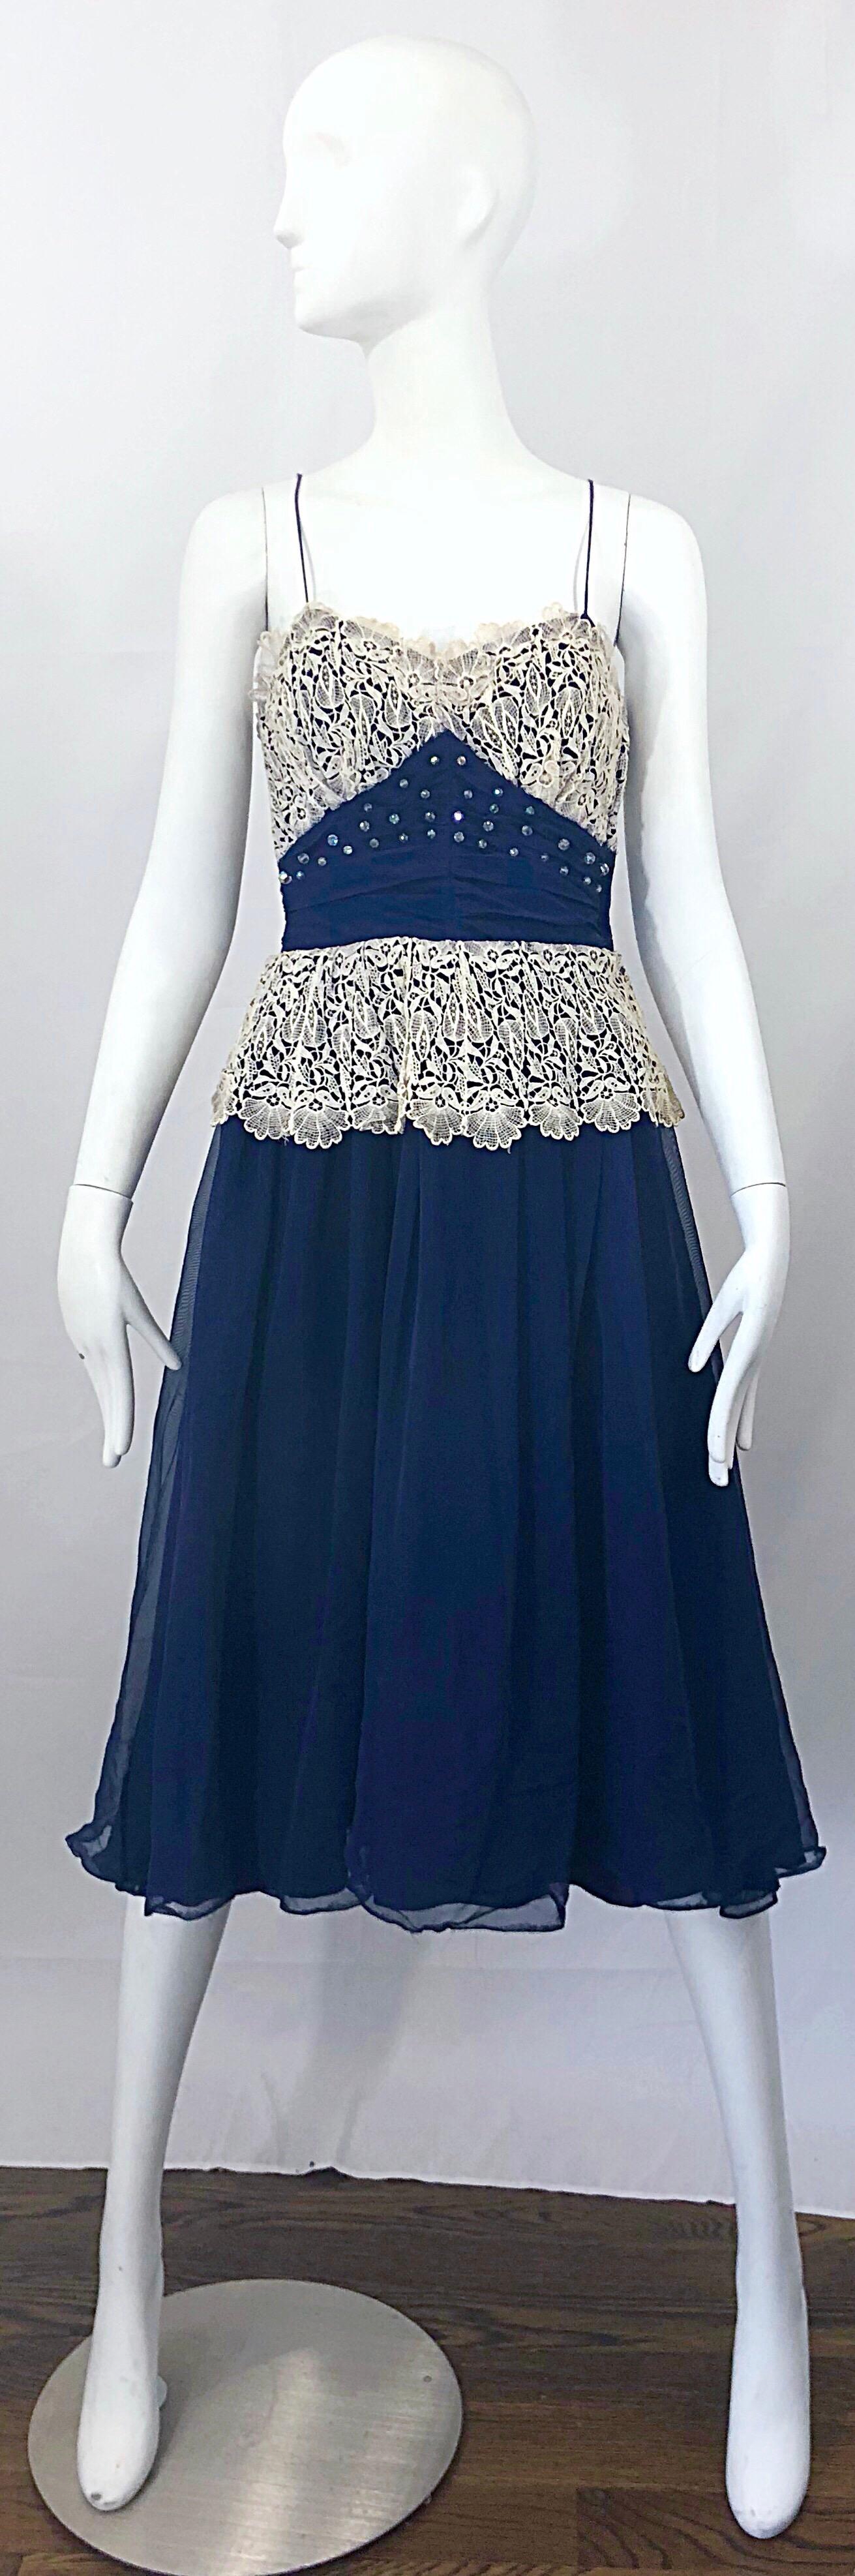 Beautiful 1950s FRED PERLBERG navy blue and ivory lace rhinestone sleeveless dress! Features a pretty navy blue fabric with ivory lace at bust and waist. Sparkly rhinestone sequins adorn the front bodice. Tailored fitted bodice with a forgiving full